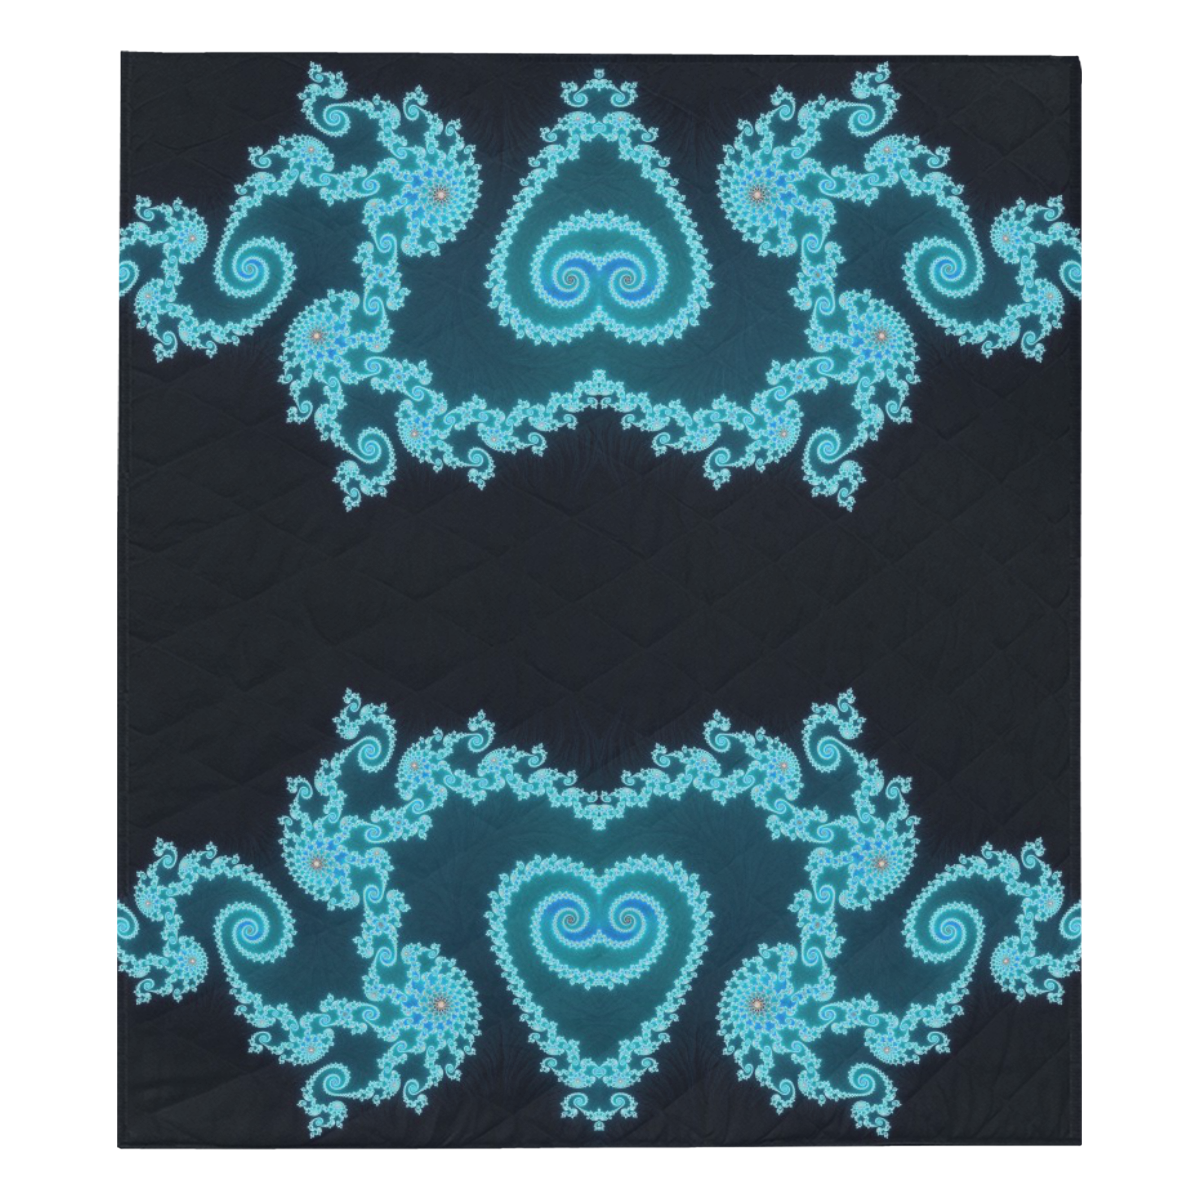 Sky Blue and Black Hearts Lace Fractal Abstract Quilt 70"x80"